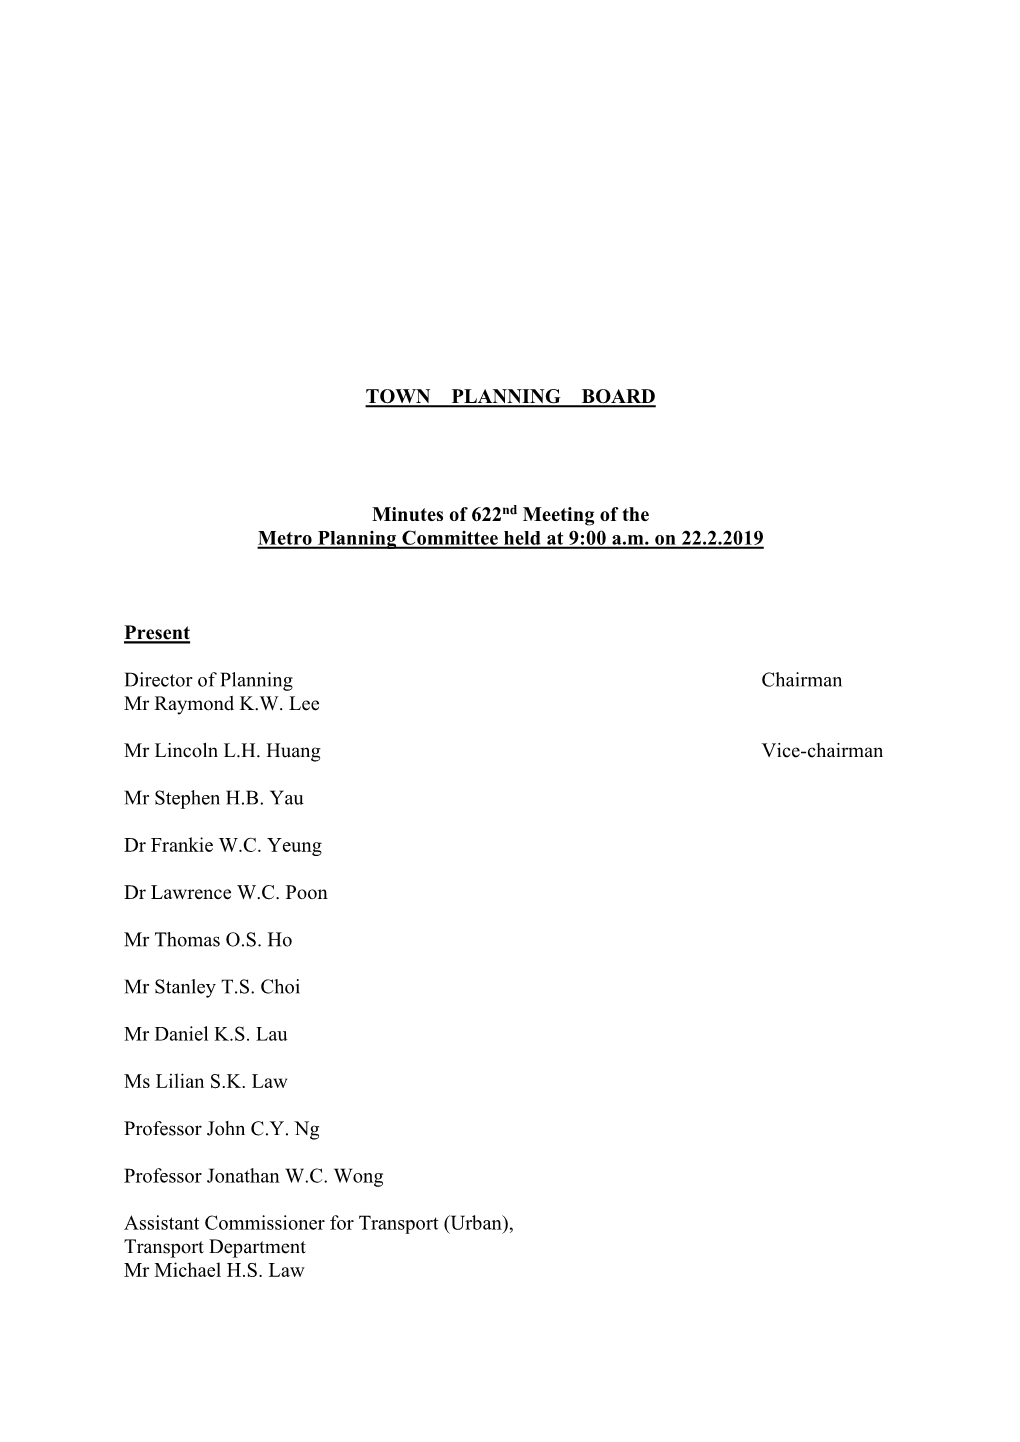 Minutes of 622Nd Meeting of the Metro Planning Committee Held at 9:00 A.M